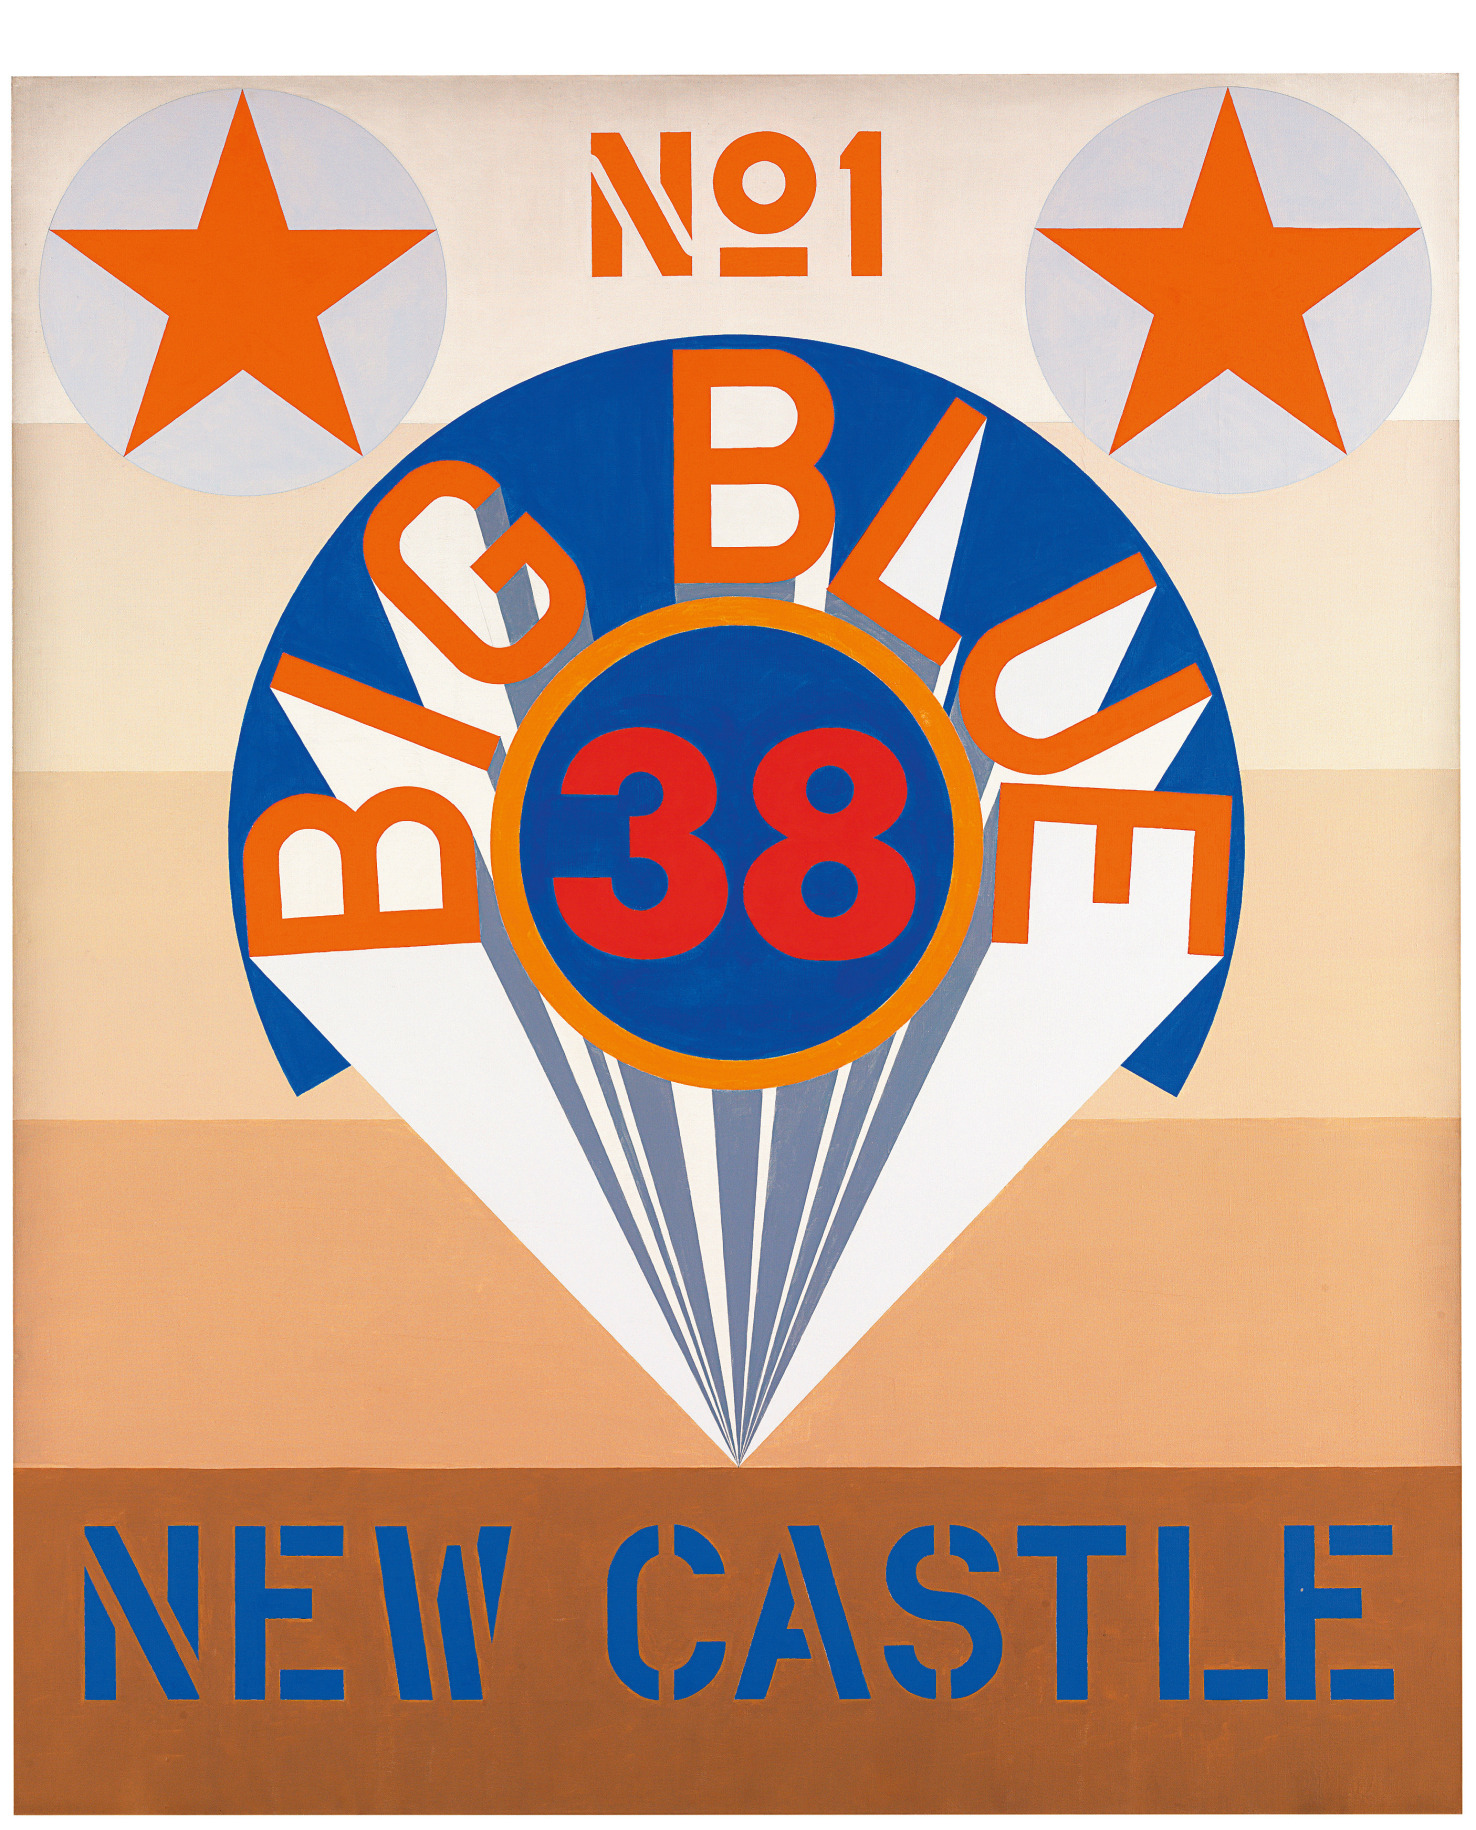 A 60 by 50 inch canvas with a ground consisting of five horizontal stripes starting with beige at top and becoming increasingly darker. The darkest brown stripe at the bottom of the canvas contains the title, &quot;New Castle&quot; painted in stenciled blue letters.  In the center of the canvas is red number 38 in a blue circle with an orange outline. Above the circle is a a blue arc with &quot;Big Blue&quot; painted in orange letters. White and gray rays emanate from behind the letters, ending in a triangle below the circle. There is a white circle with an orange star at the top left and right of the canvas, in between this No 1 has been painted in orange.